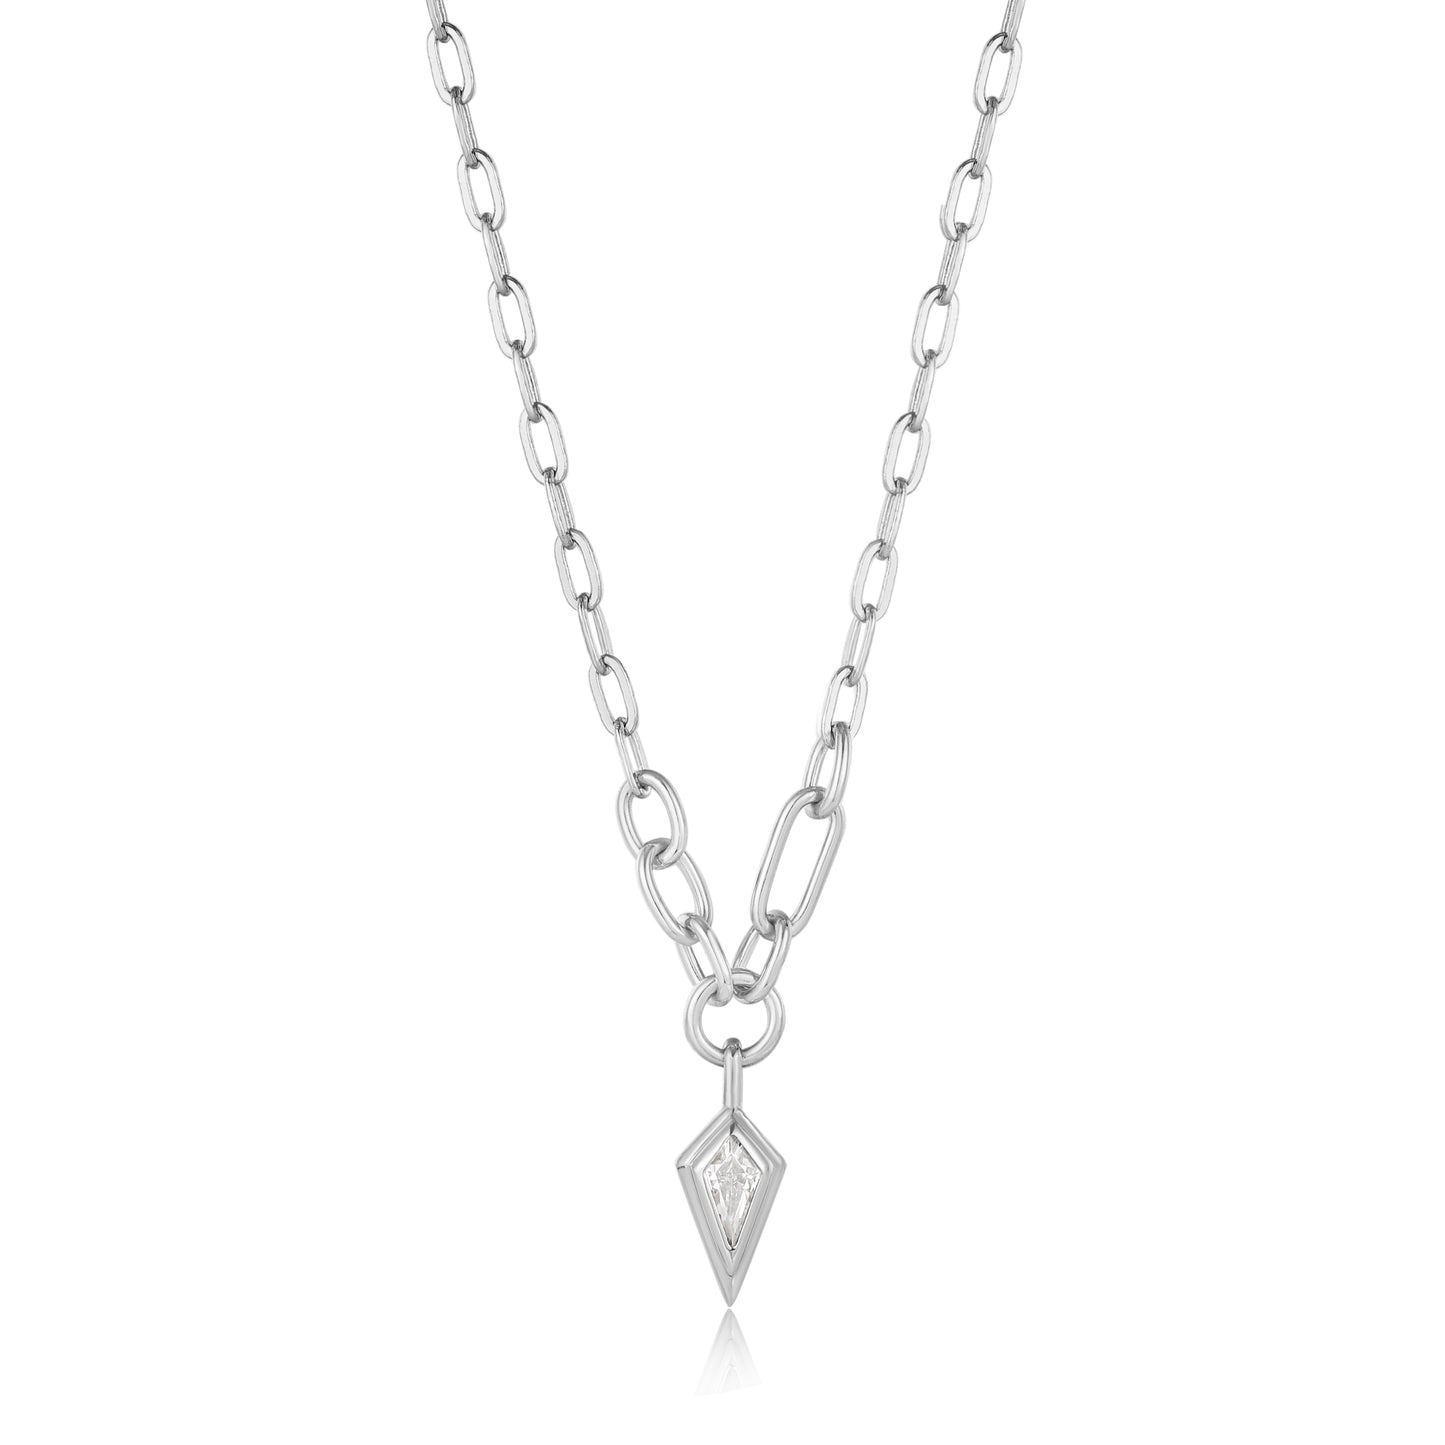 Ania Haie Silver Sparkle Drop Pendant Chunky Chain Necklace - Silver Necklace